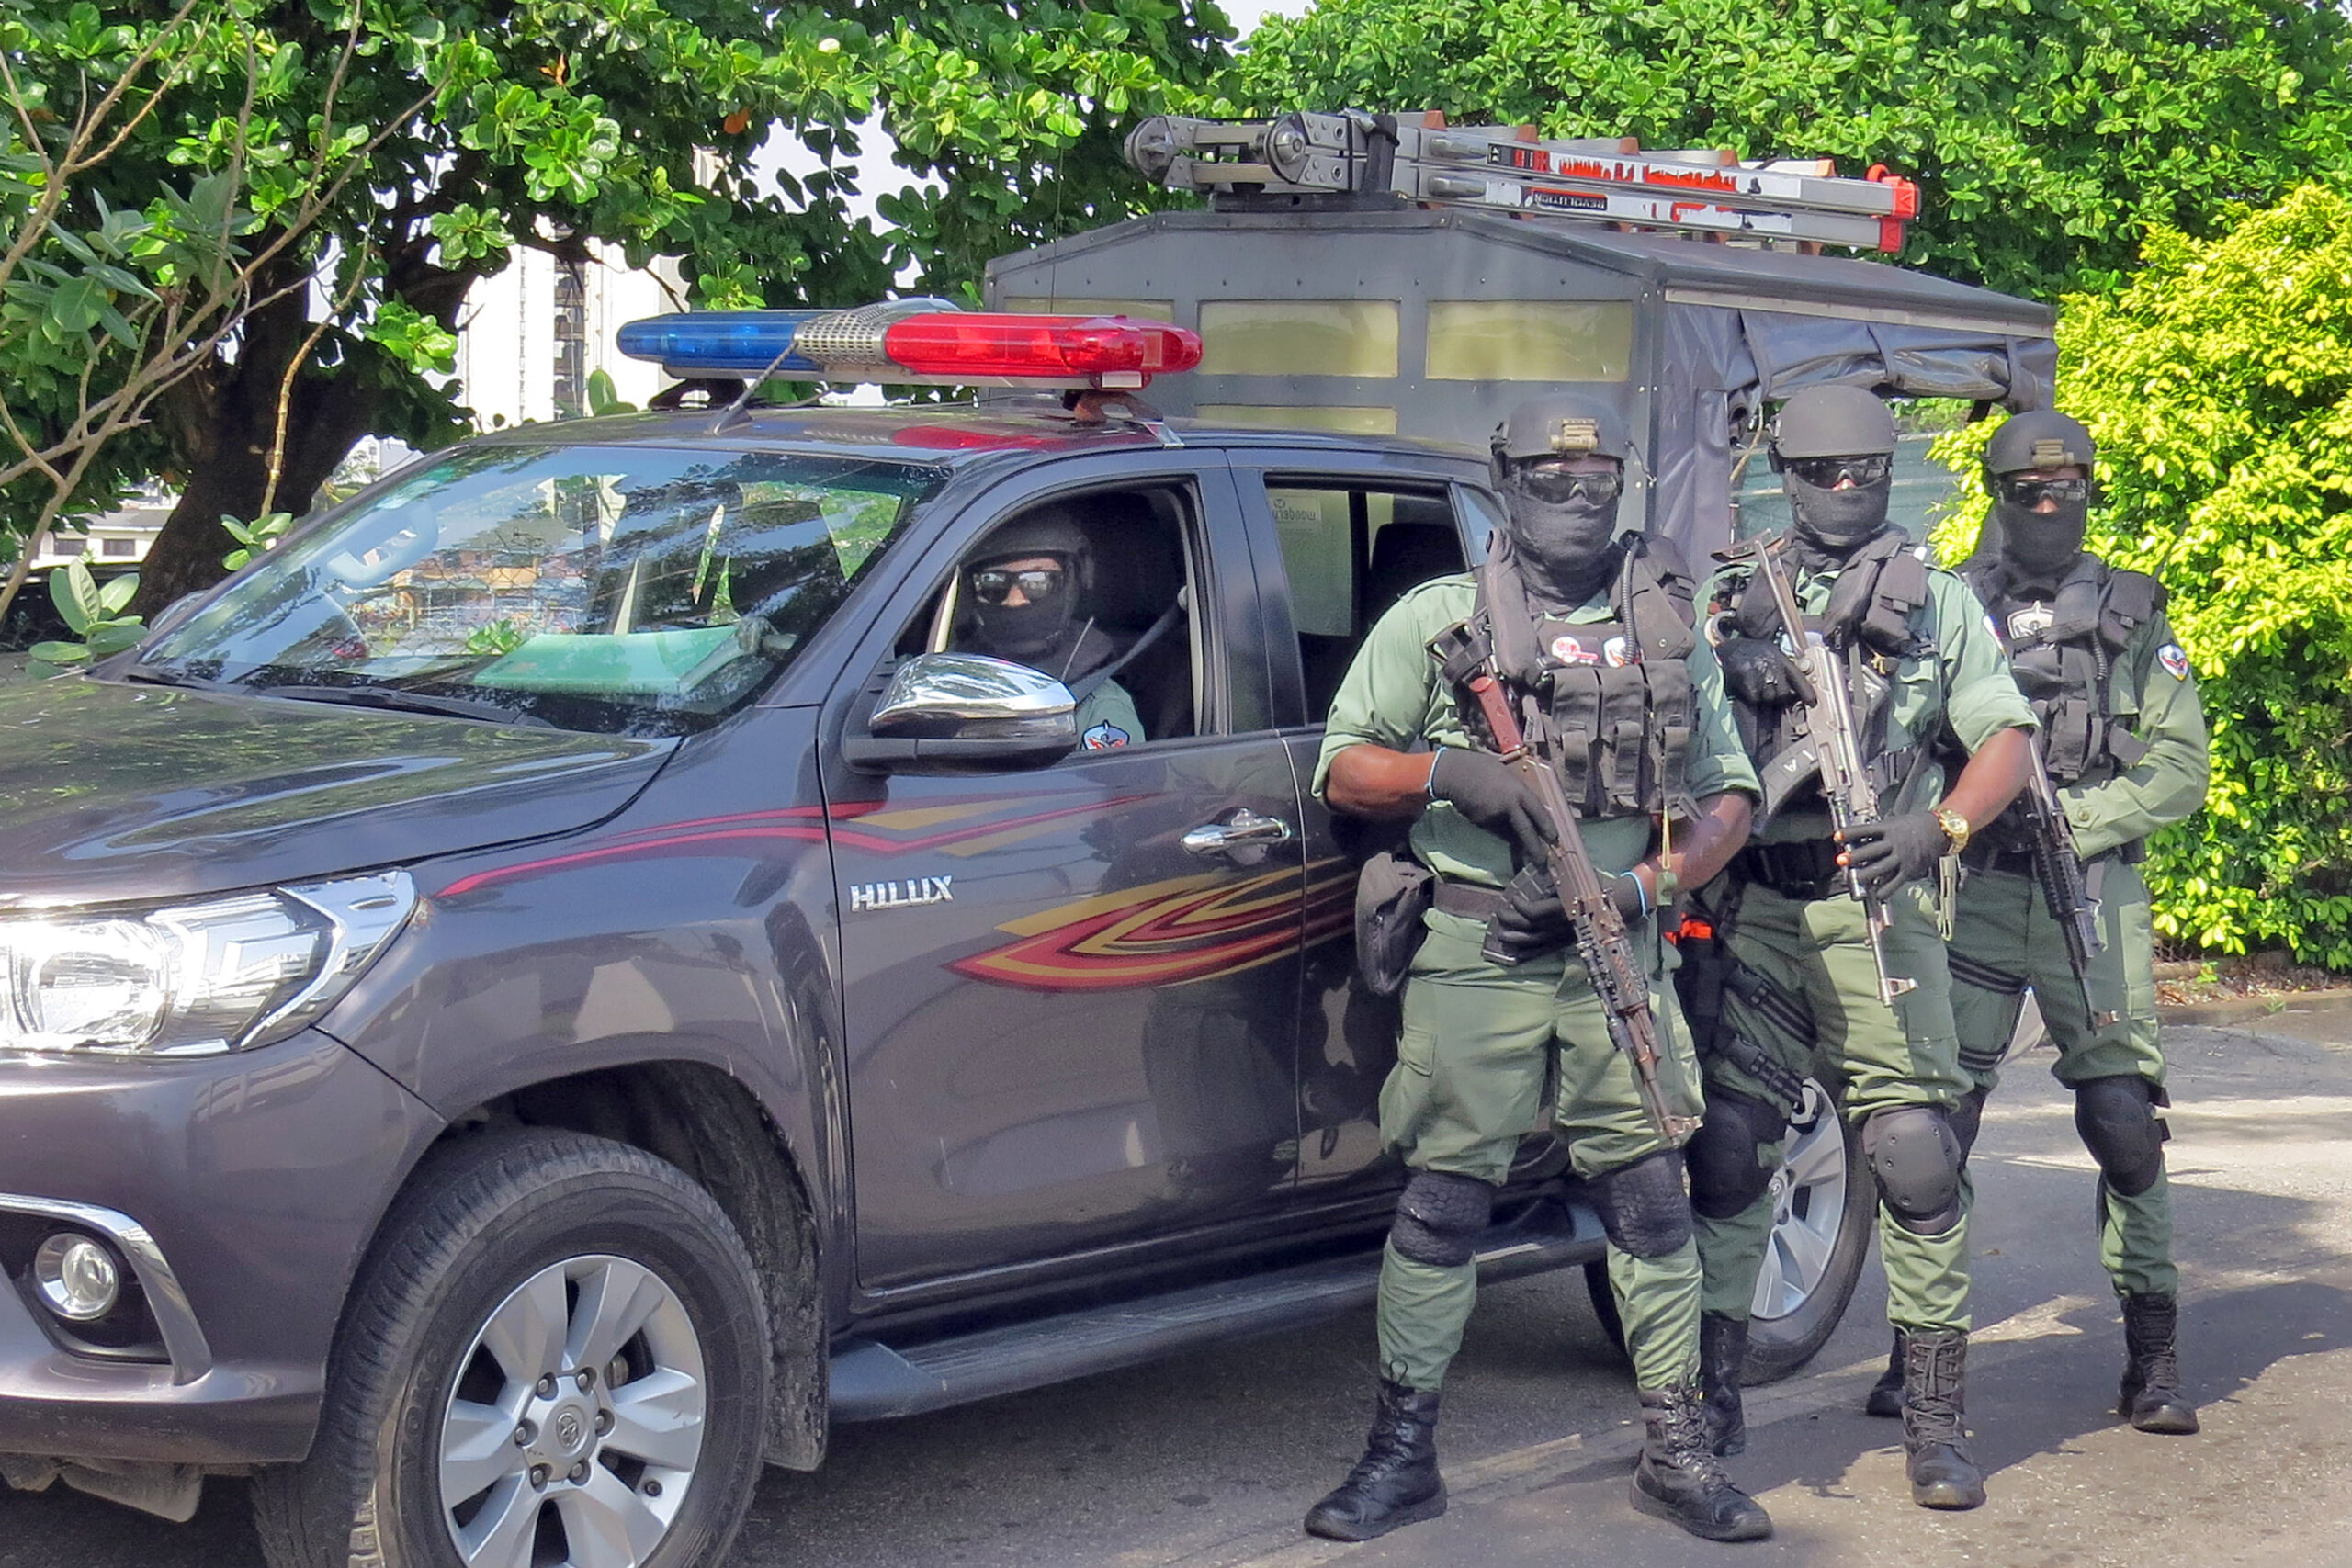 Nigerian police assigned to protect U.S. diplomatic facilities and personnel train with one of their vehicles in city of Lagos in November 2020. The police are part of a Special Program for Embassy Augmentation Response (SPEAR) team. SPEAR teams are quick-response forces trained and funded by the Diplomatic Security Service’s Office of Antiterrorism Assistance (ATA). (Department of State photo)